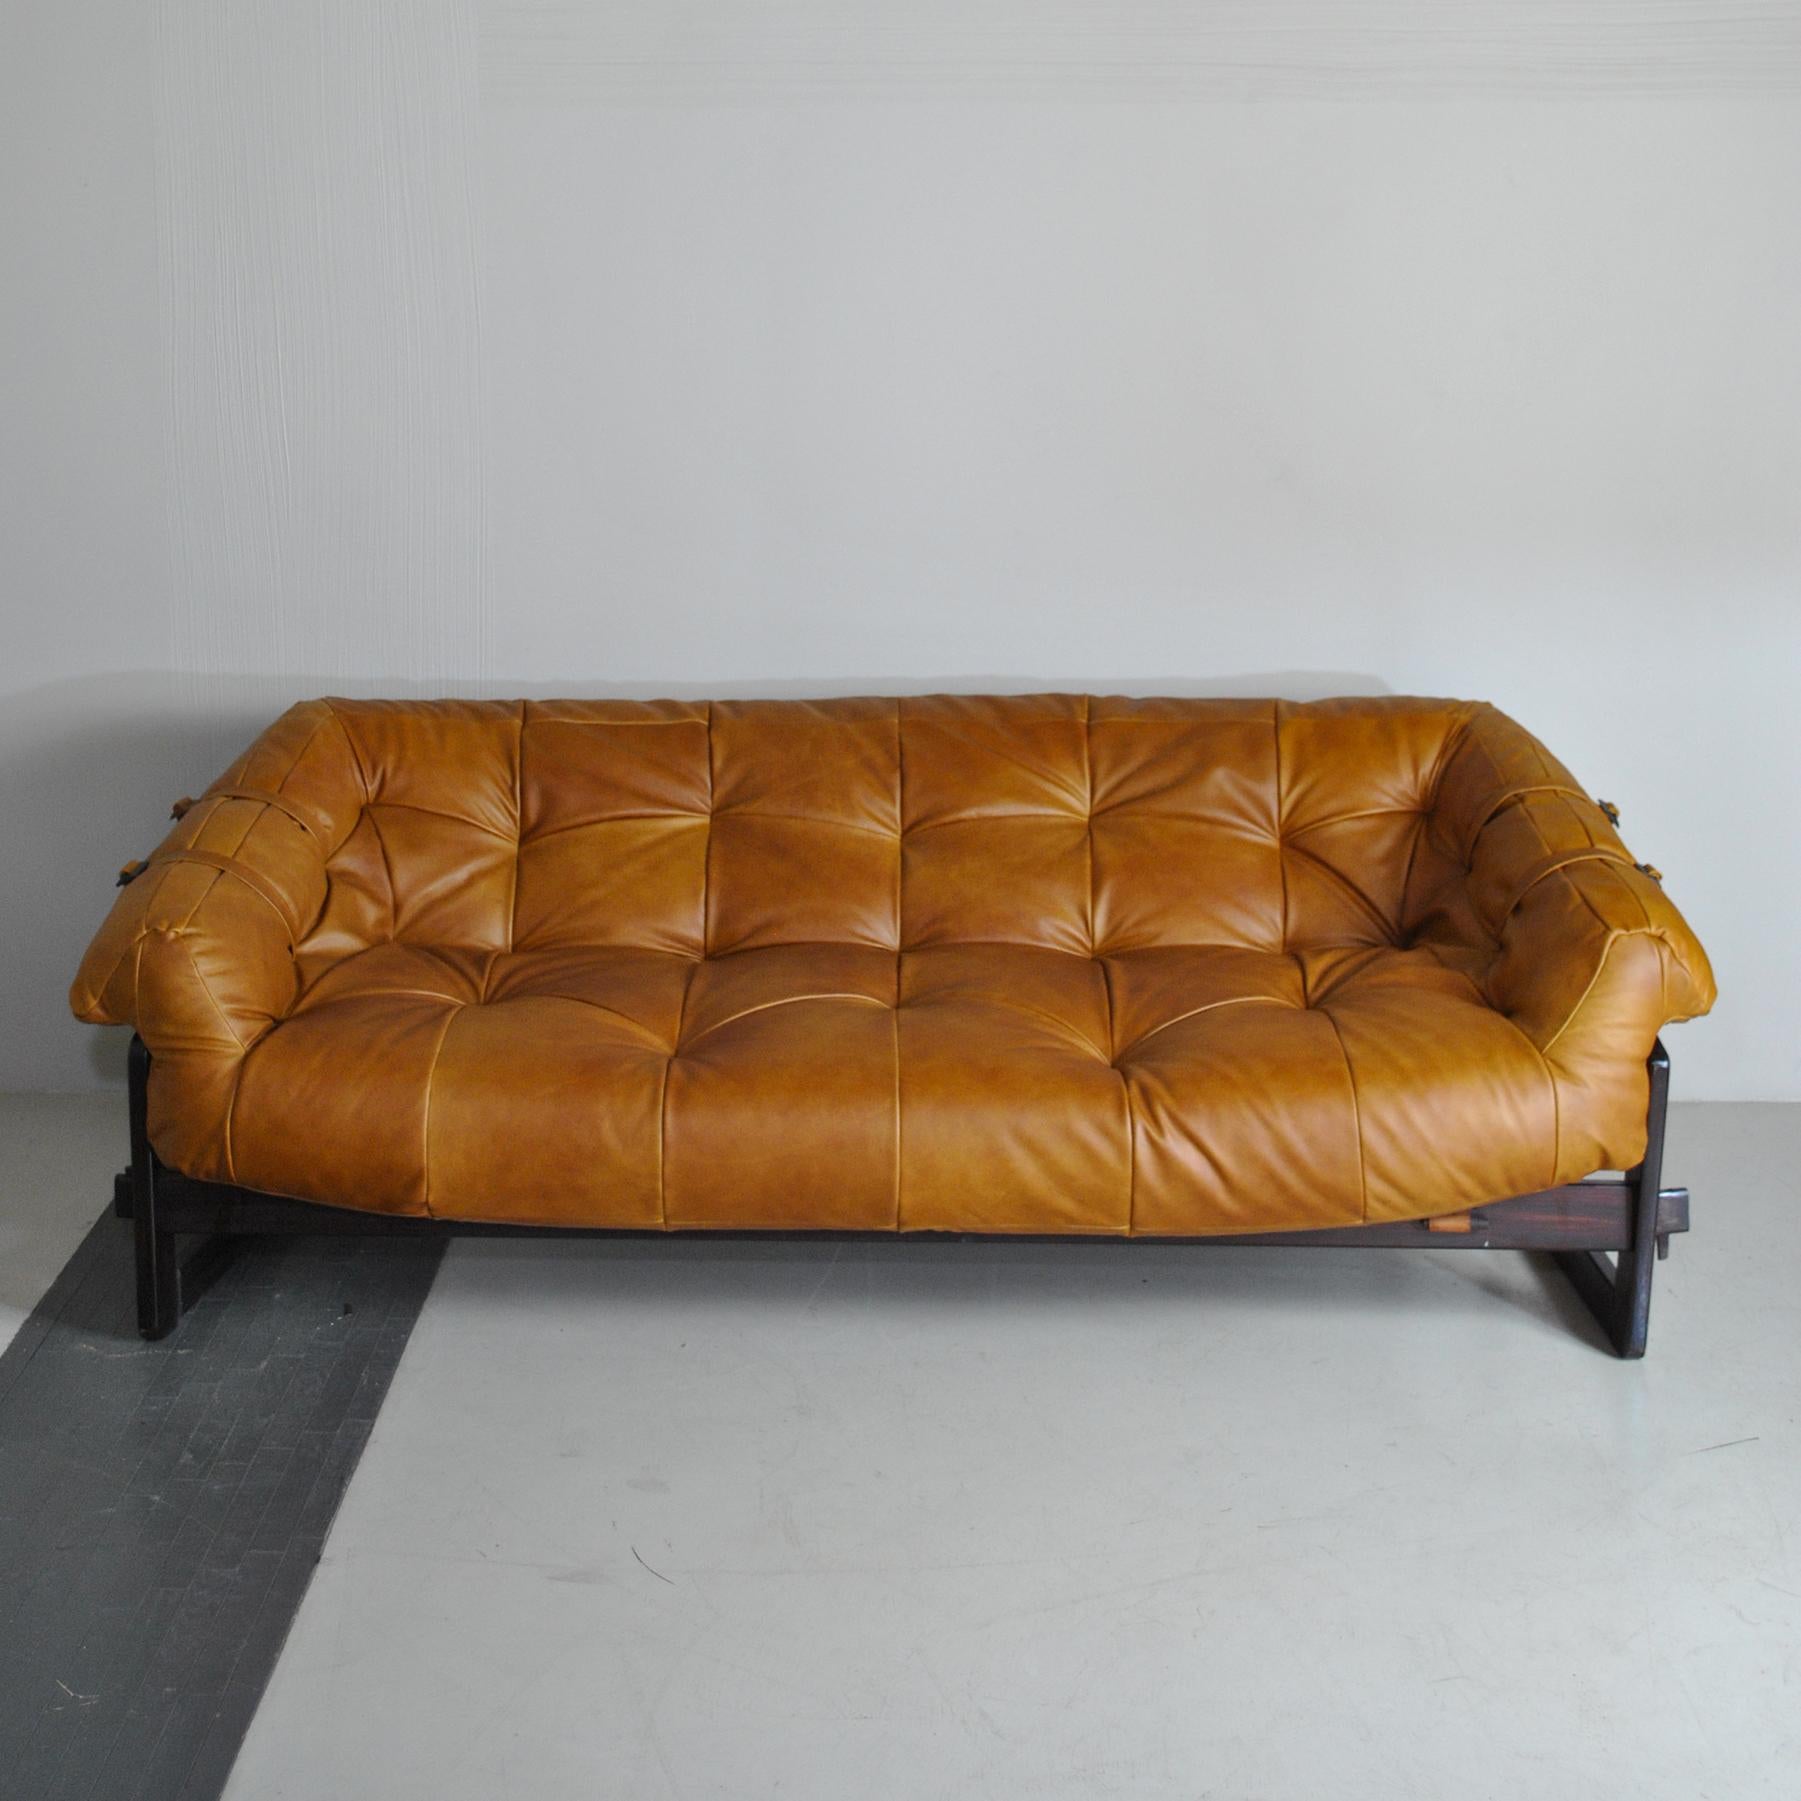 Sofa by Percival Lafer. Brazilian design and original leather. Really unique design and construction make this a true statement piece.
  